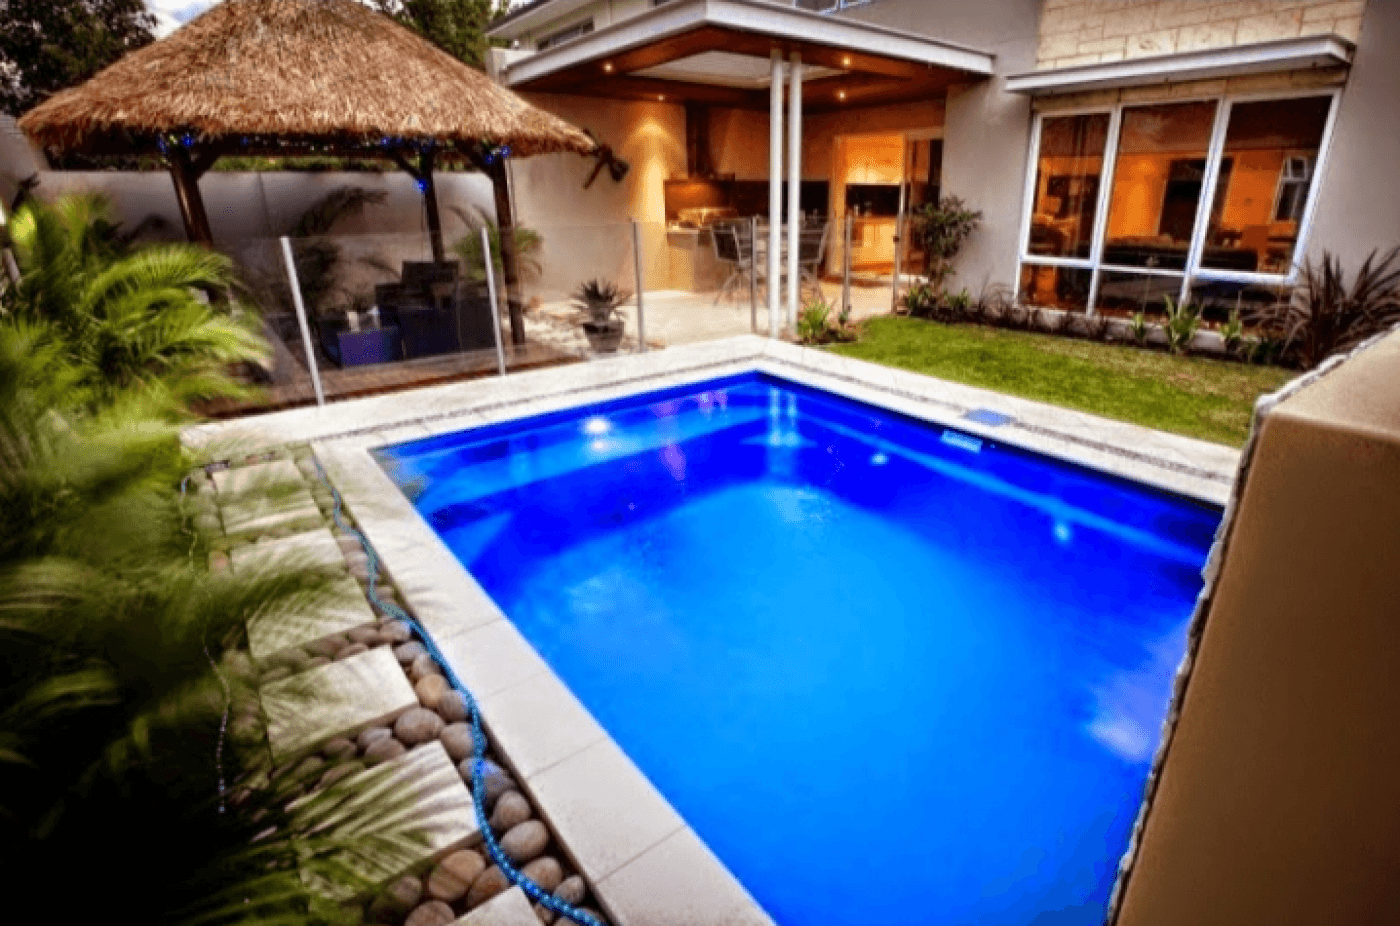 pool surrounds